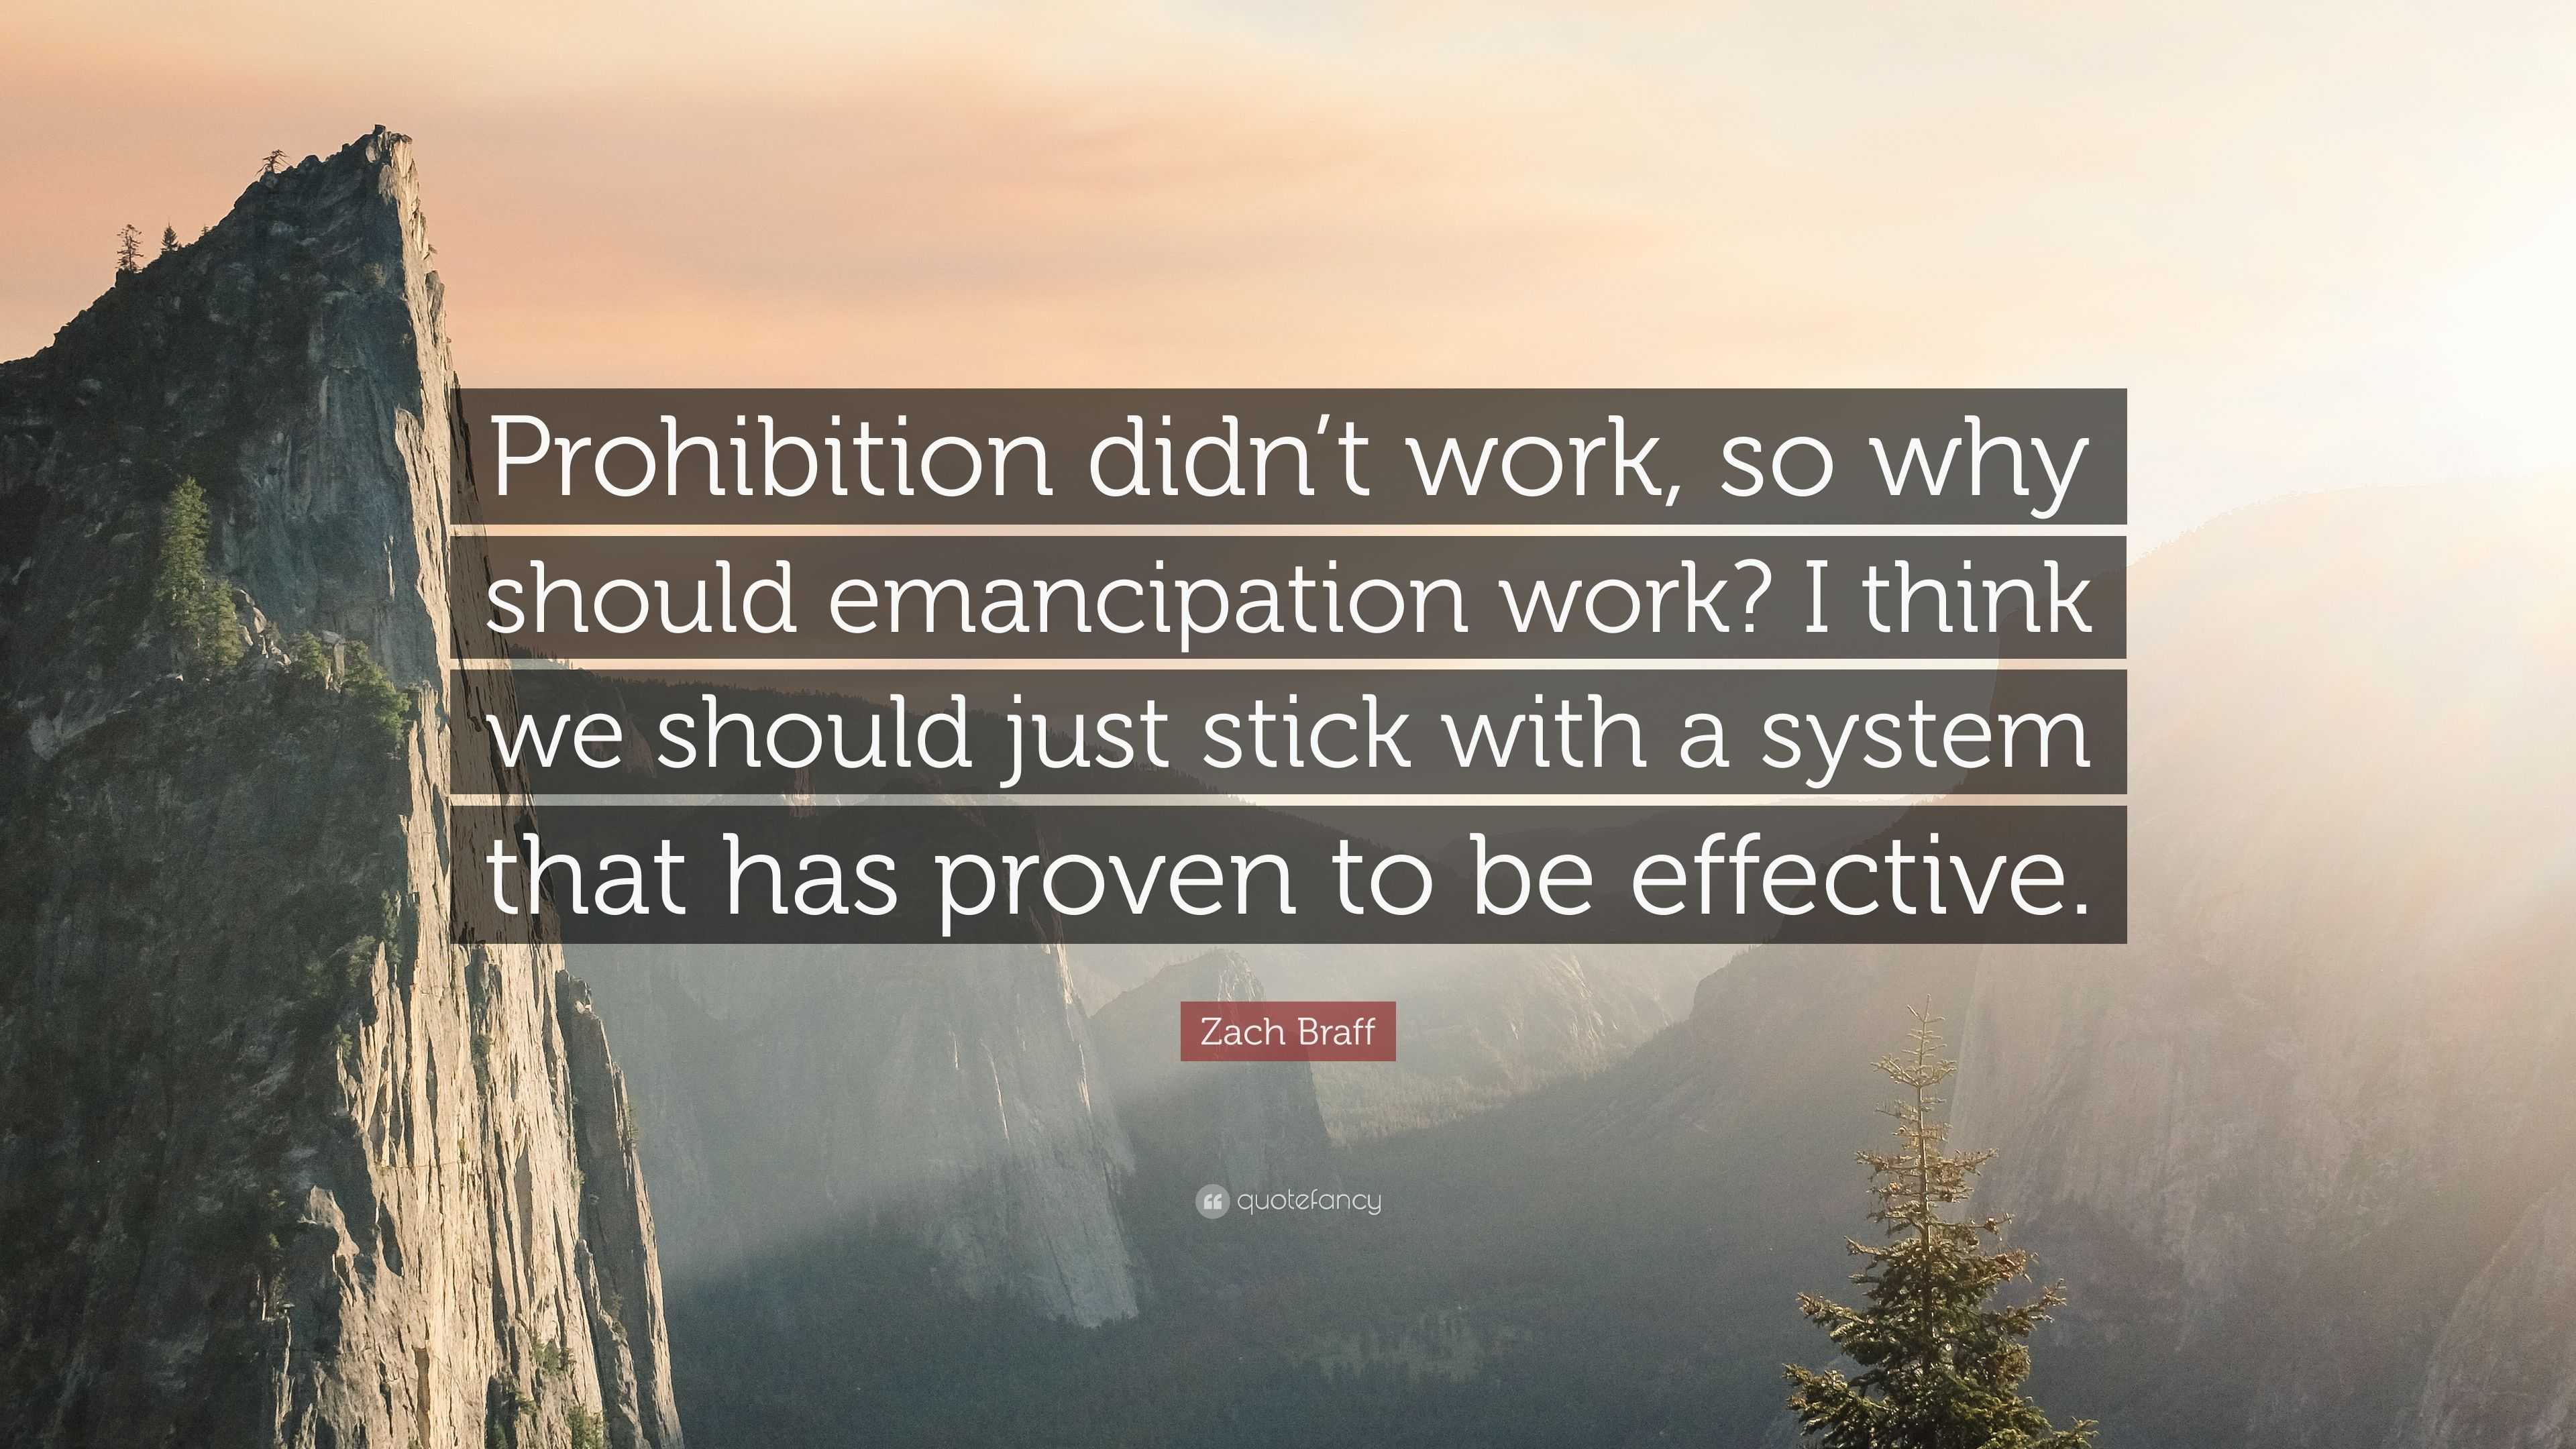 Zach Braff Quote “prohibition Didnt Work So Why Should Emancipation